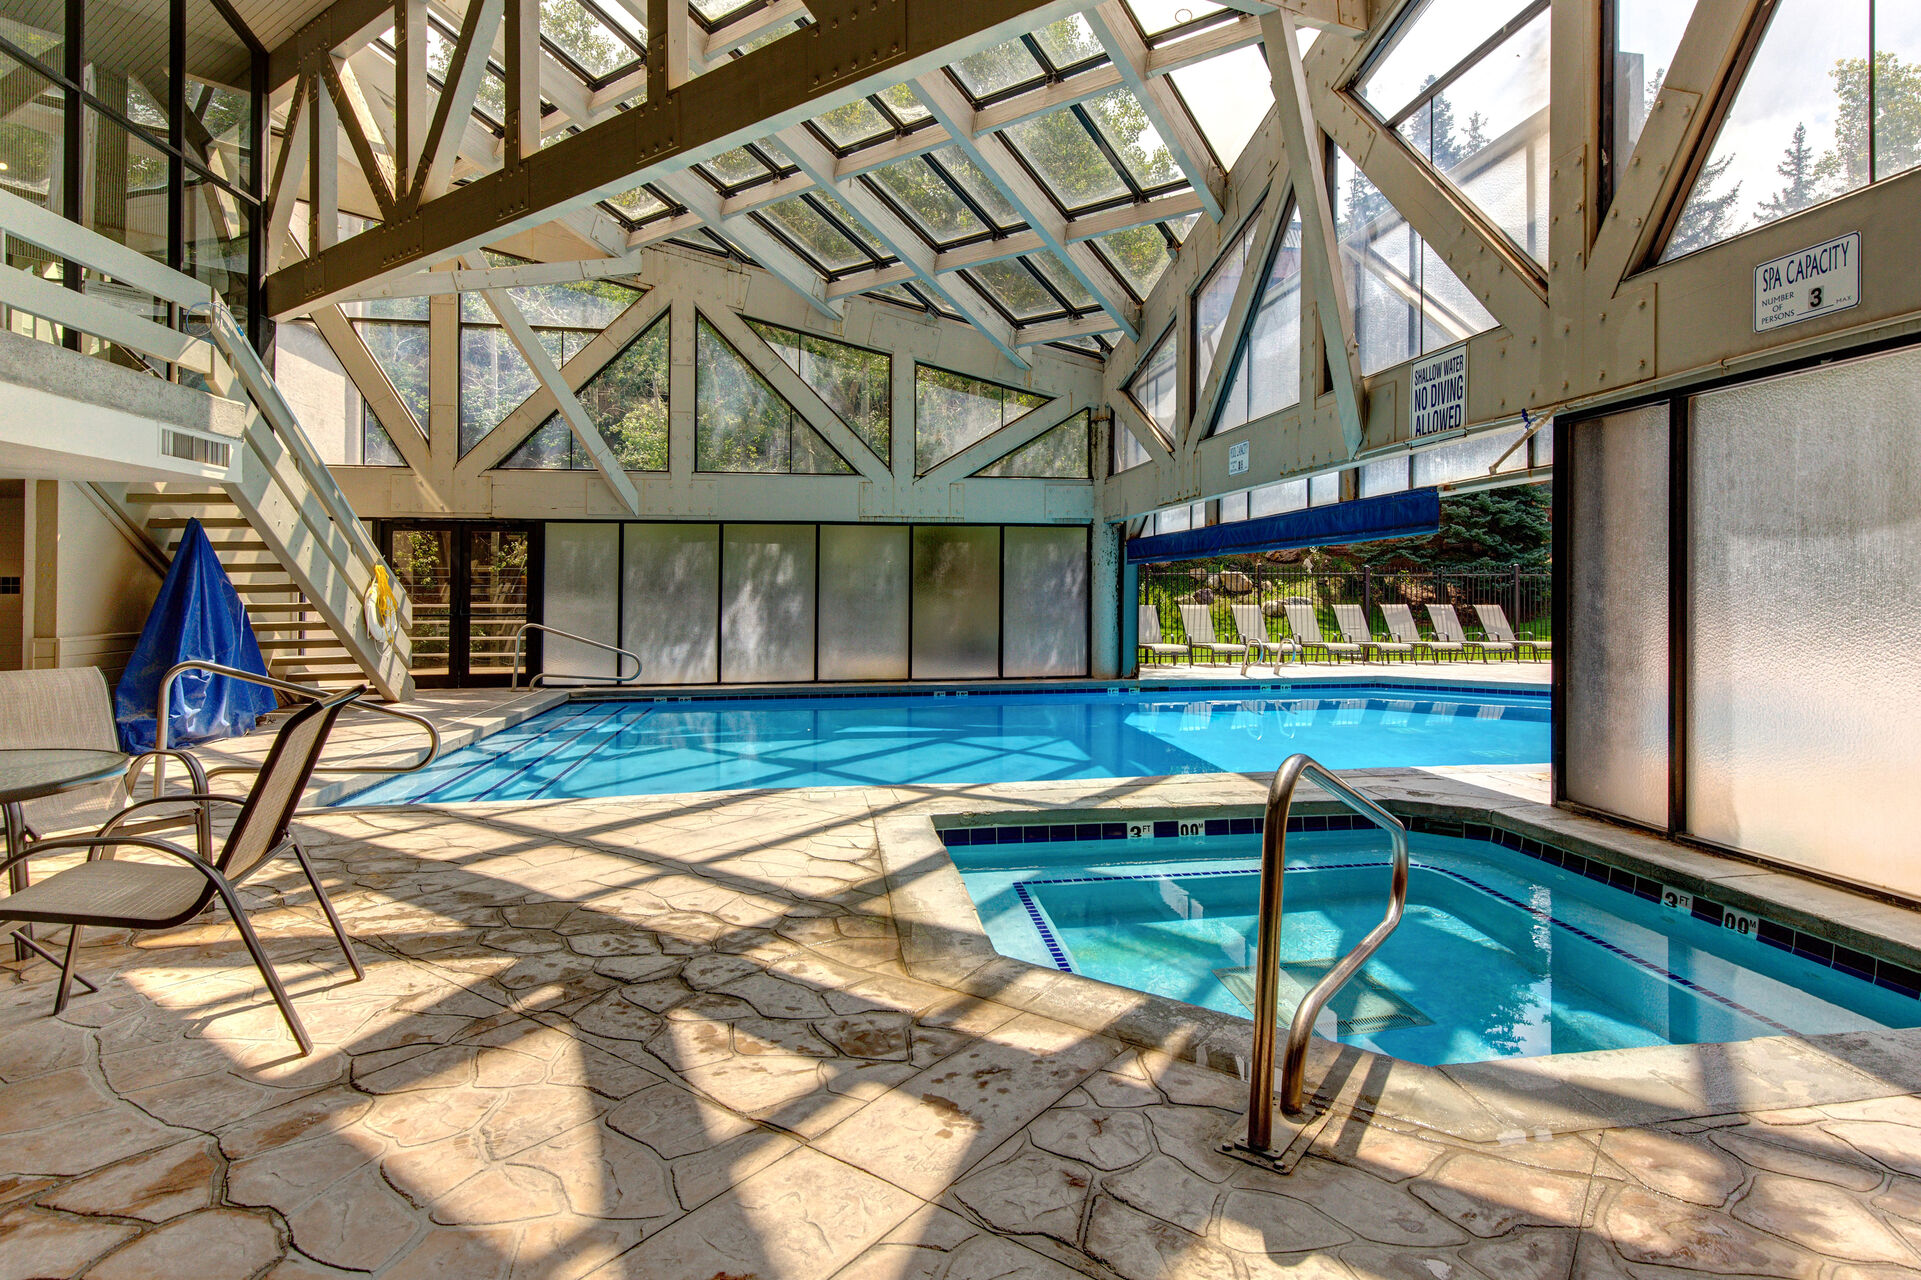 Communal, Indoor/Outdoor pool and hot tub